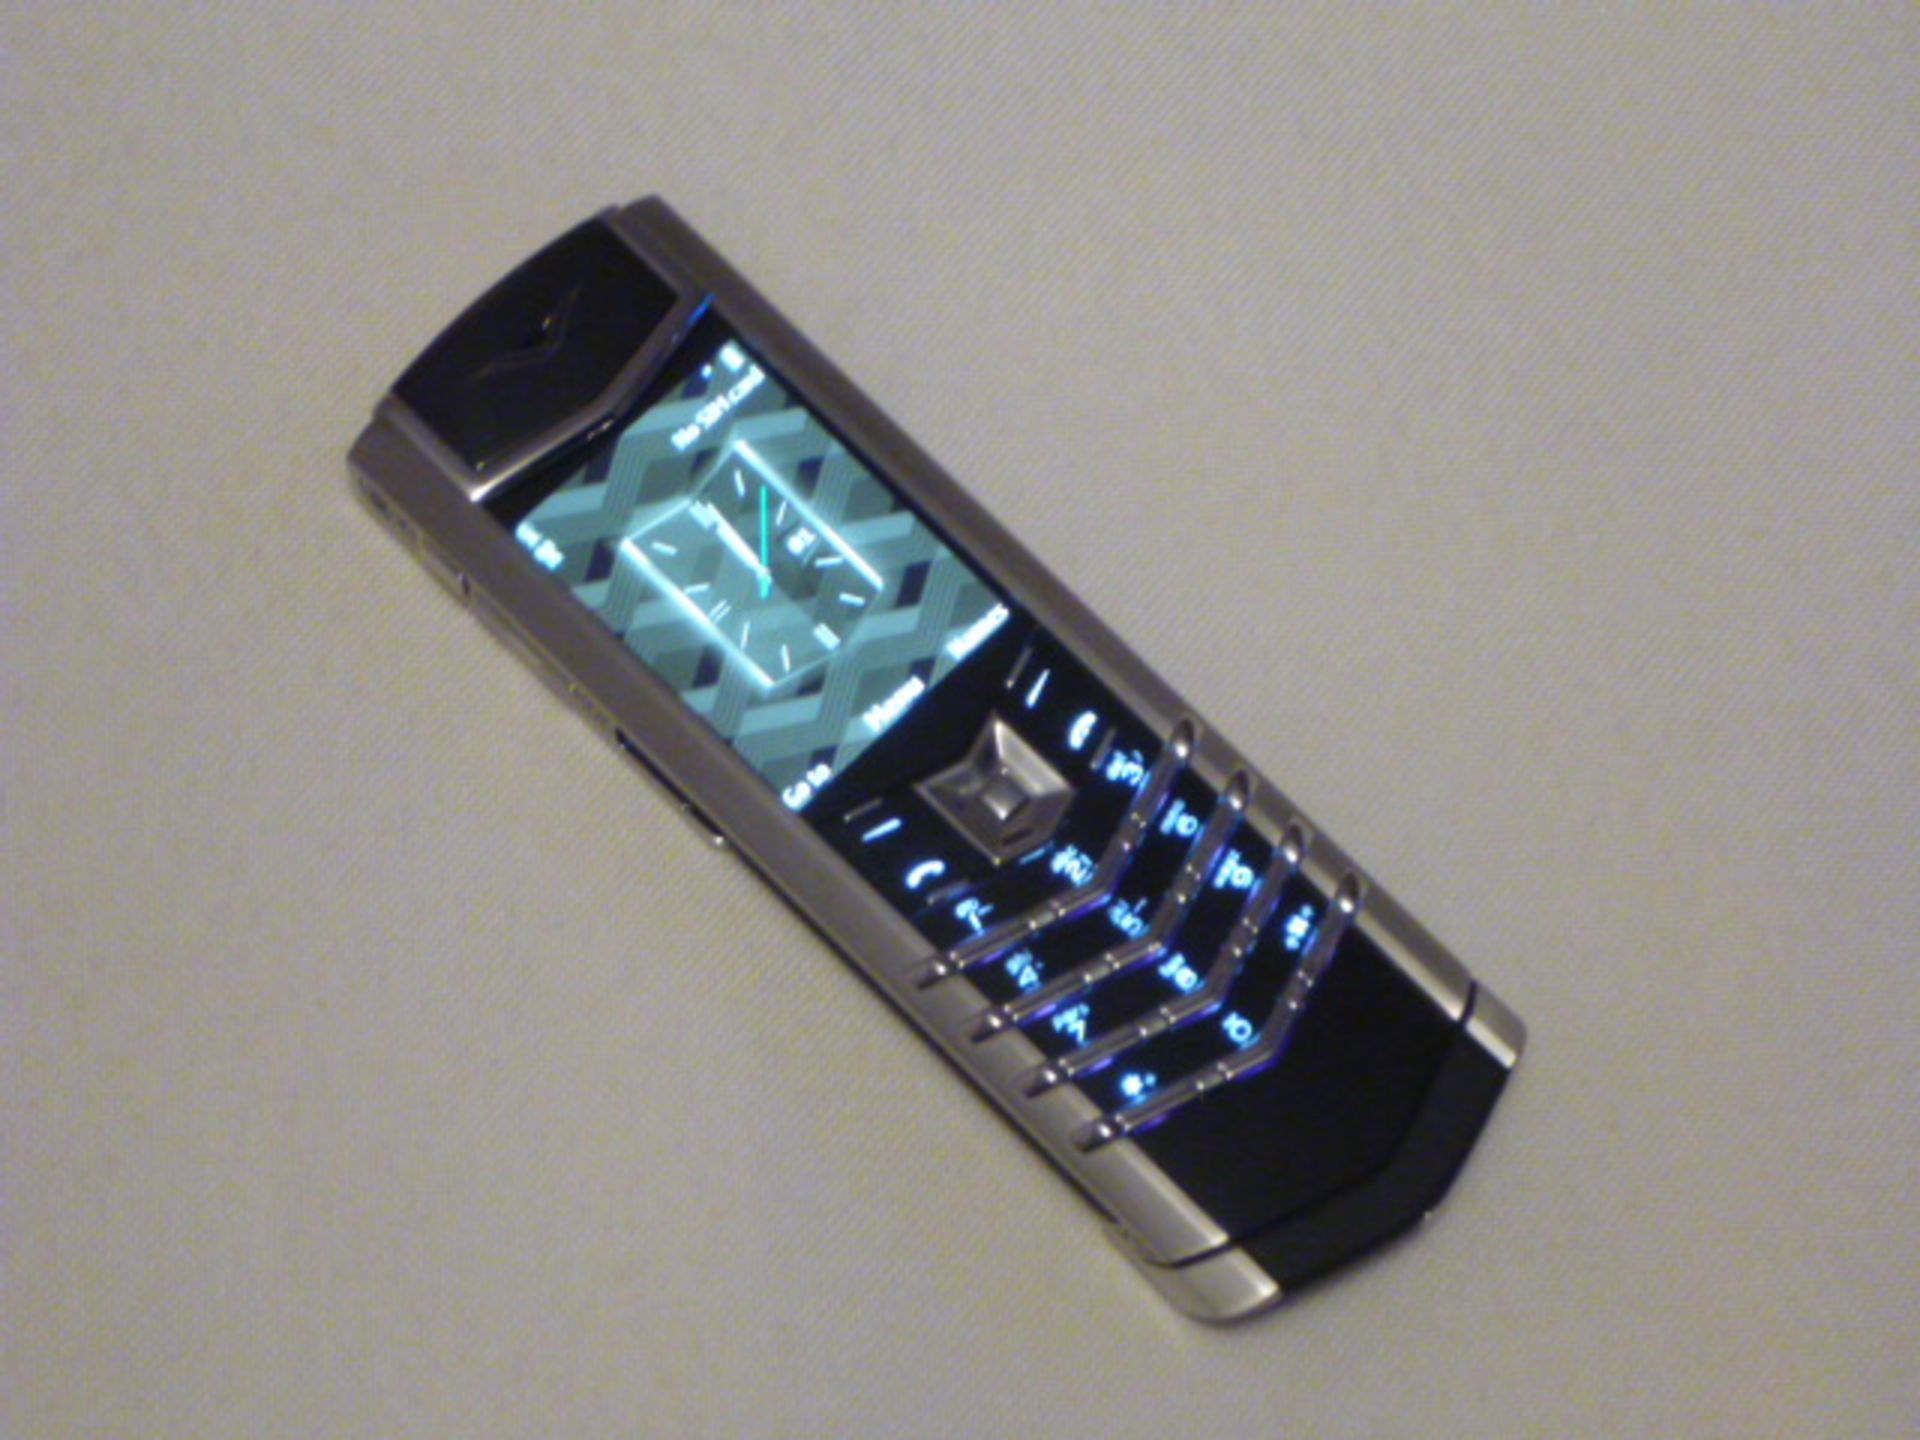 Vertu Signature S Phone (Cinderella Version) Brushed Stainless Steel with Black Leather, S/N S-